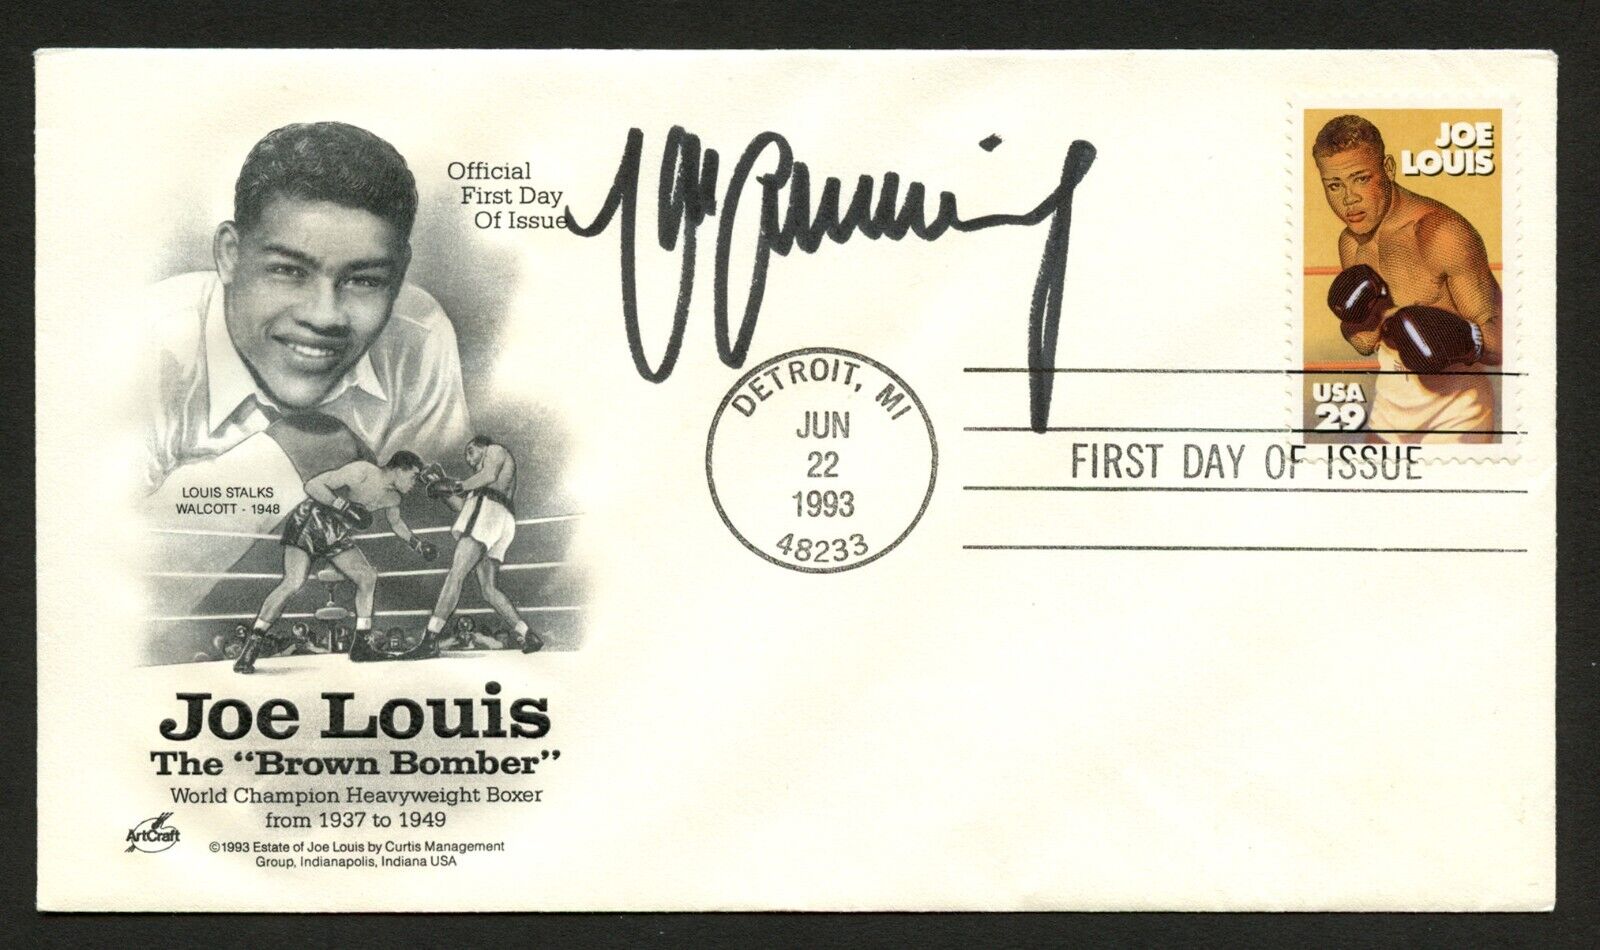 Max Schmeling d2005 signed autograph FDC German Boxer Heavyweight Champion BAS